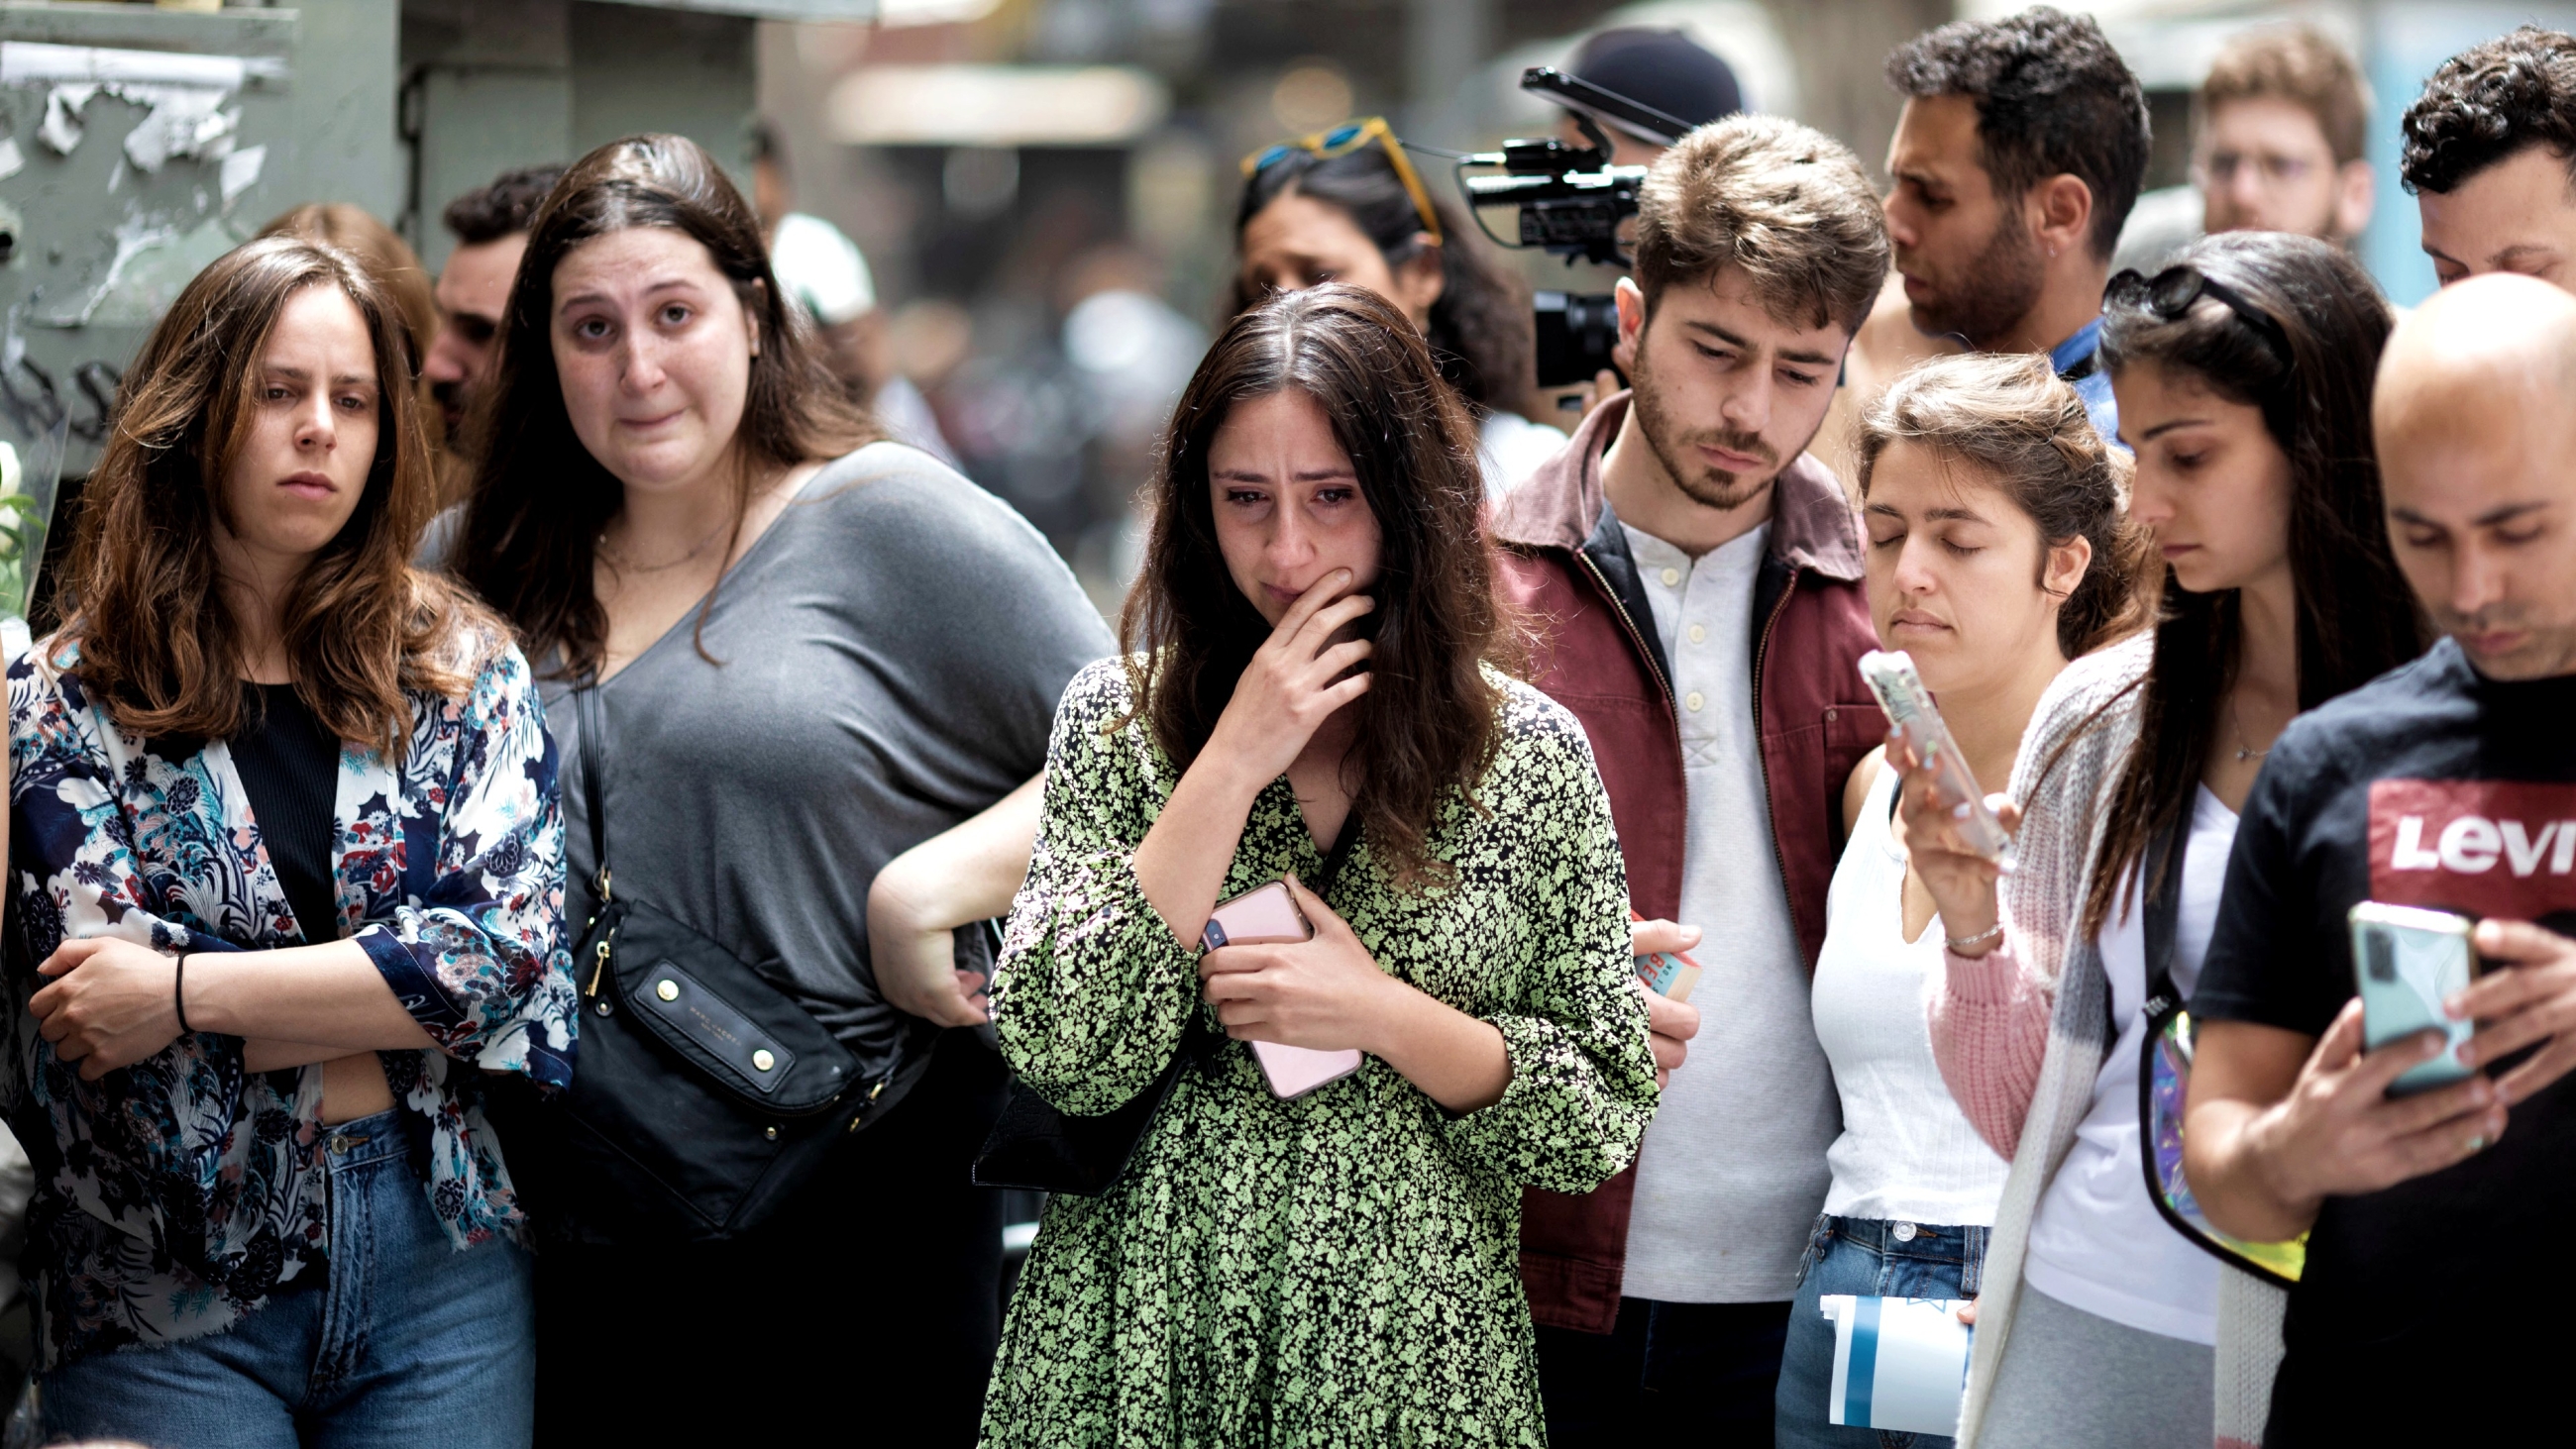 Israelis gather outside the site of the shooting in a bar in Dizengoff Street in central Tel Aviv. (MEE/Oren Ziv)